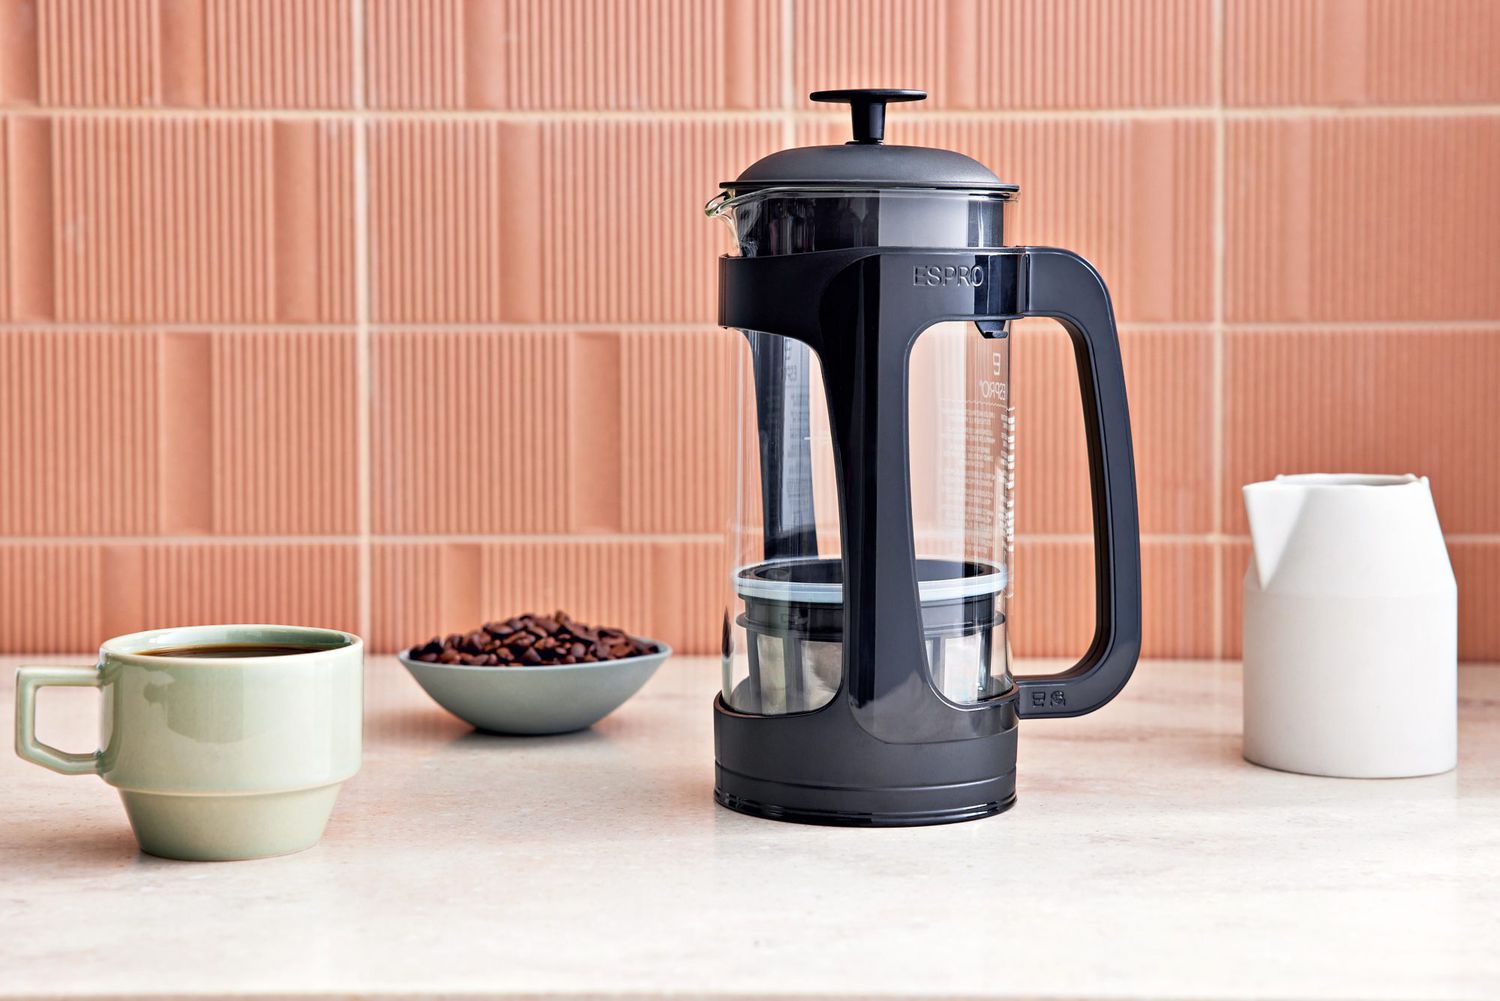 The 8 Best French Press Coffee Makers, According to Our Tests